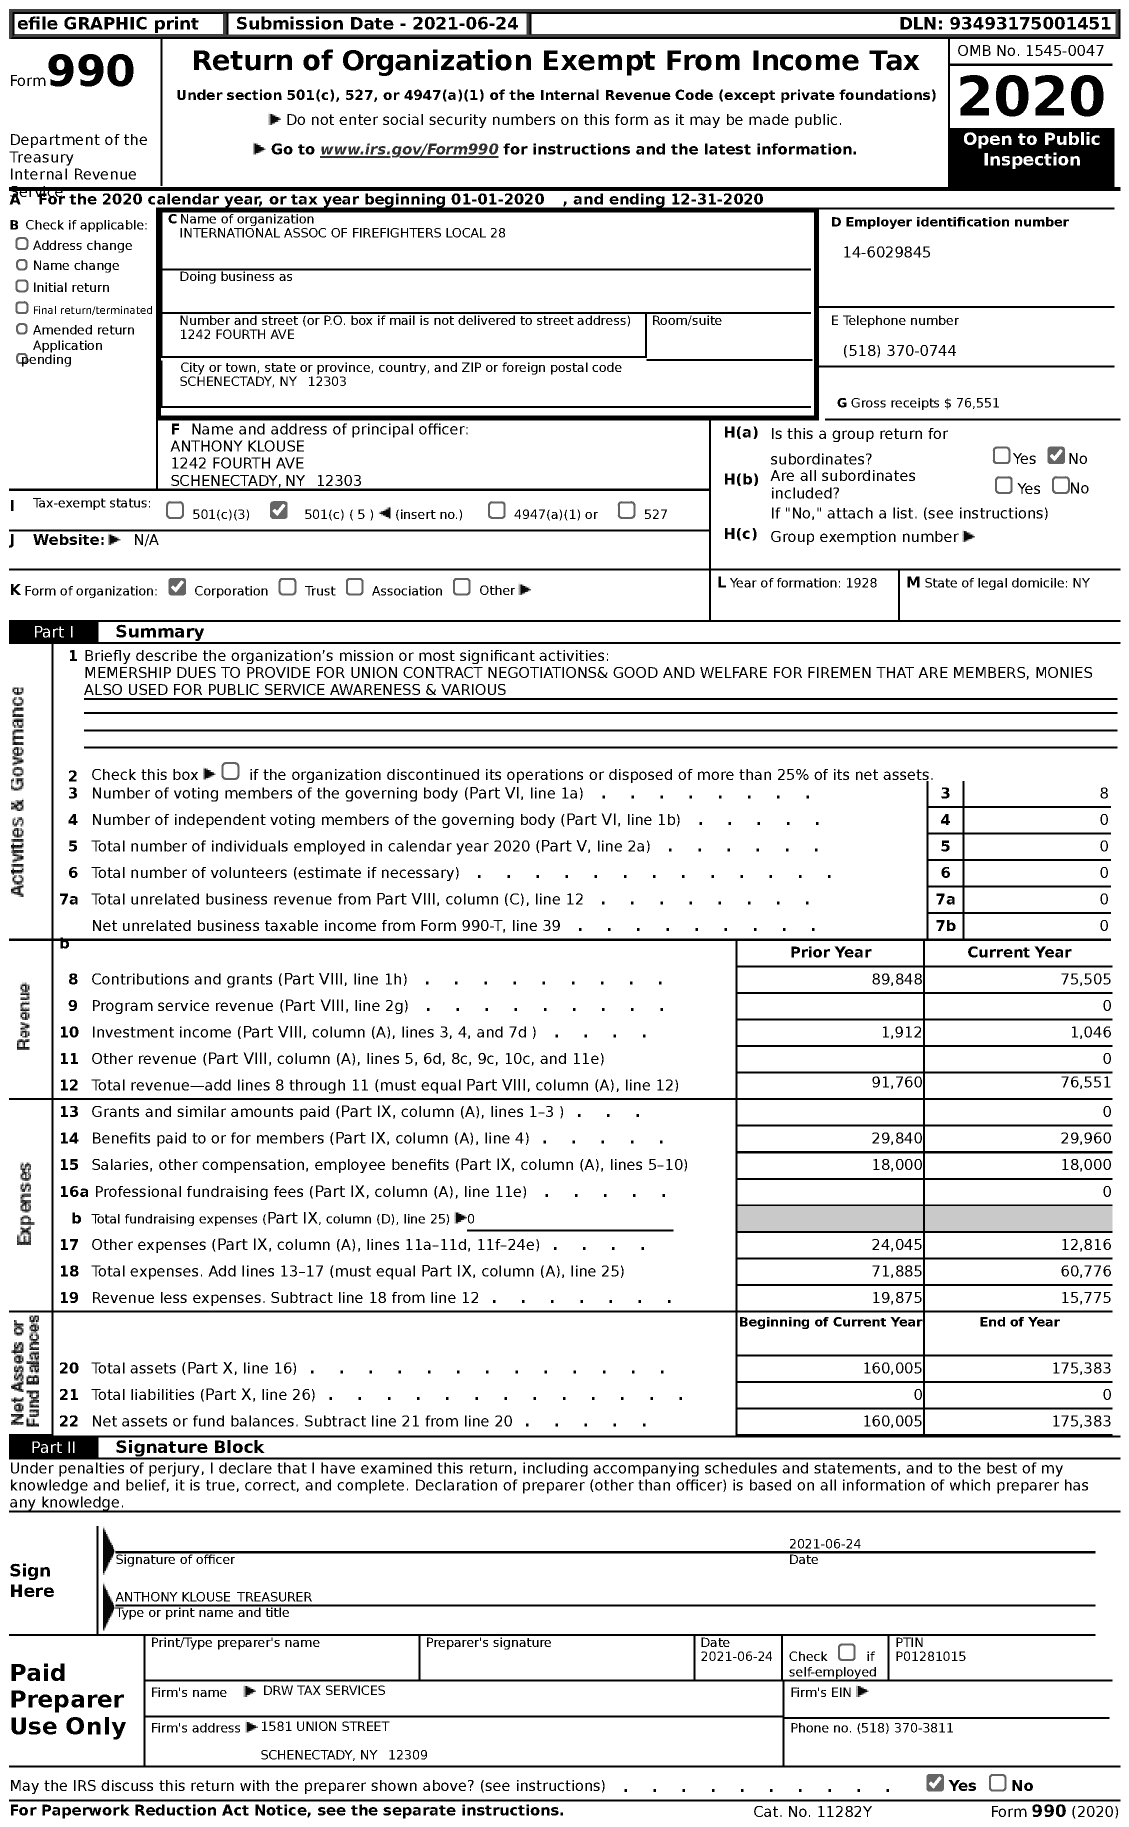 Image of first page of 2020 Form 990 for International Association of Fire Fighters - L0028 Schenectady